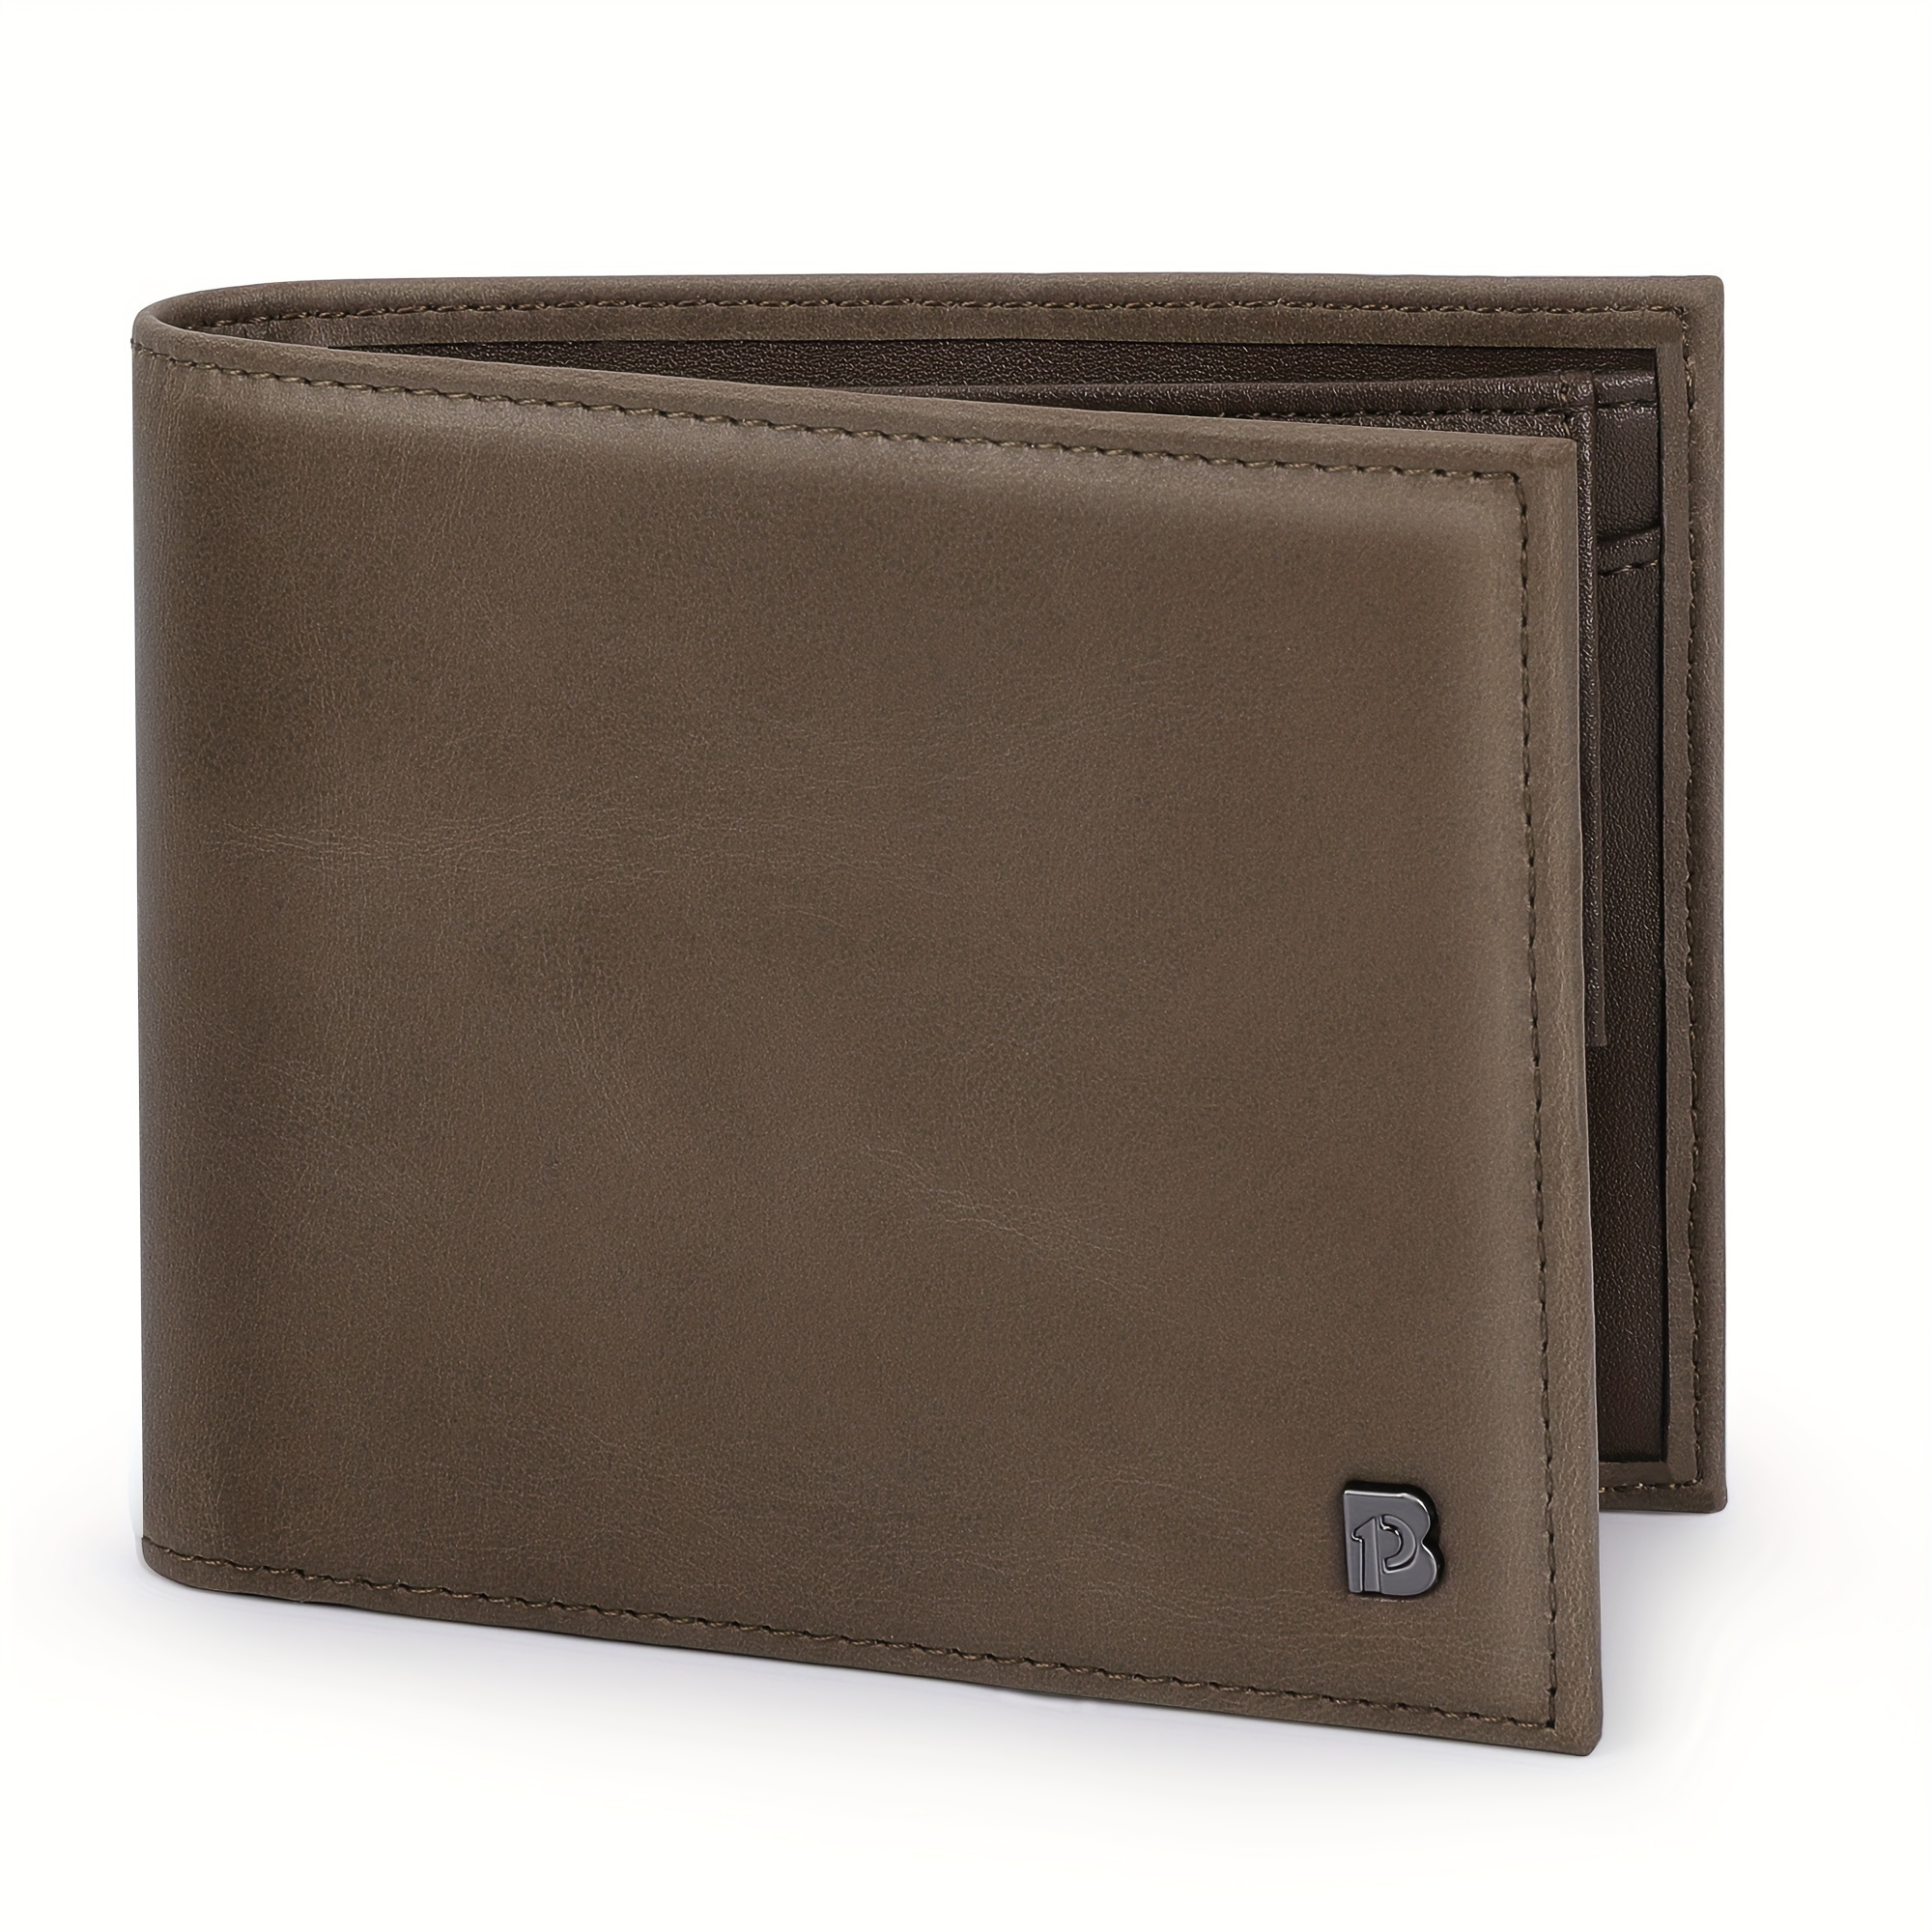 

Genuine Leather Men's Wallet With Coin Pocket And Rfid Blocking, Valentine's Day Gift For Men